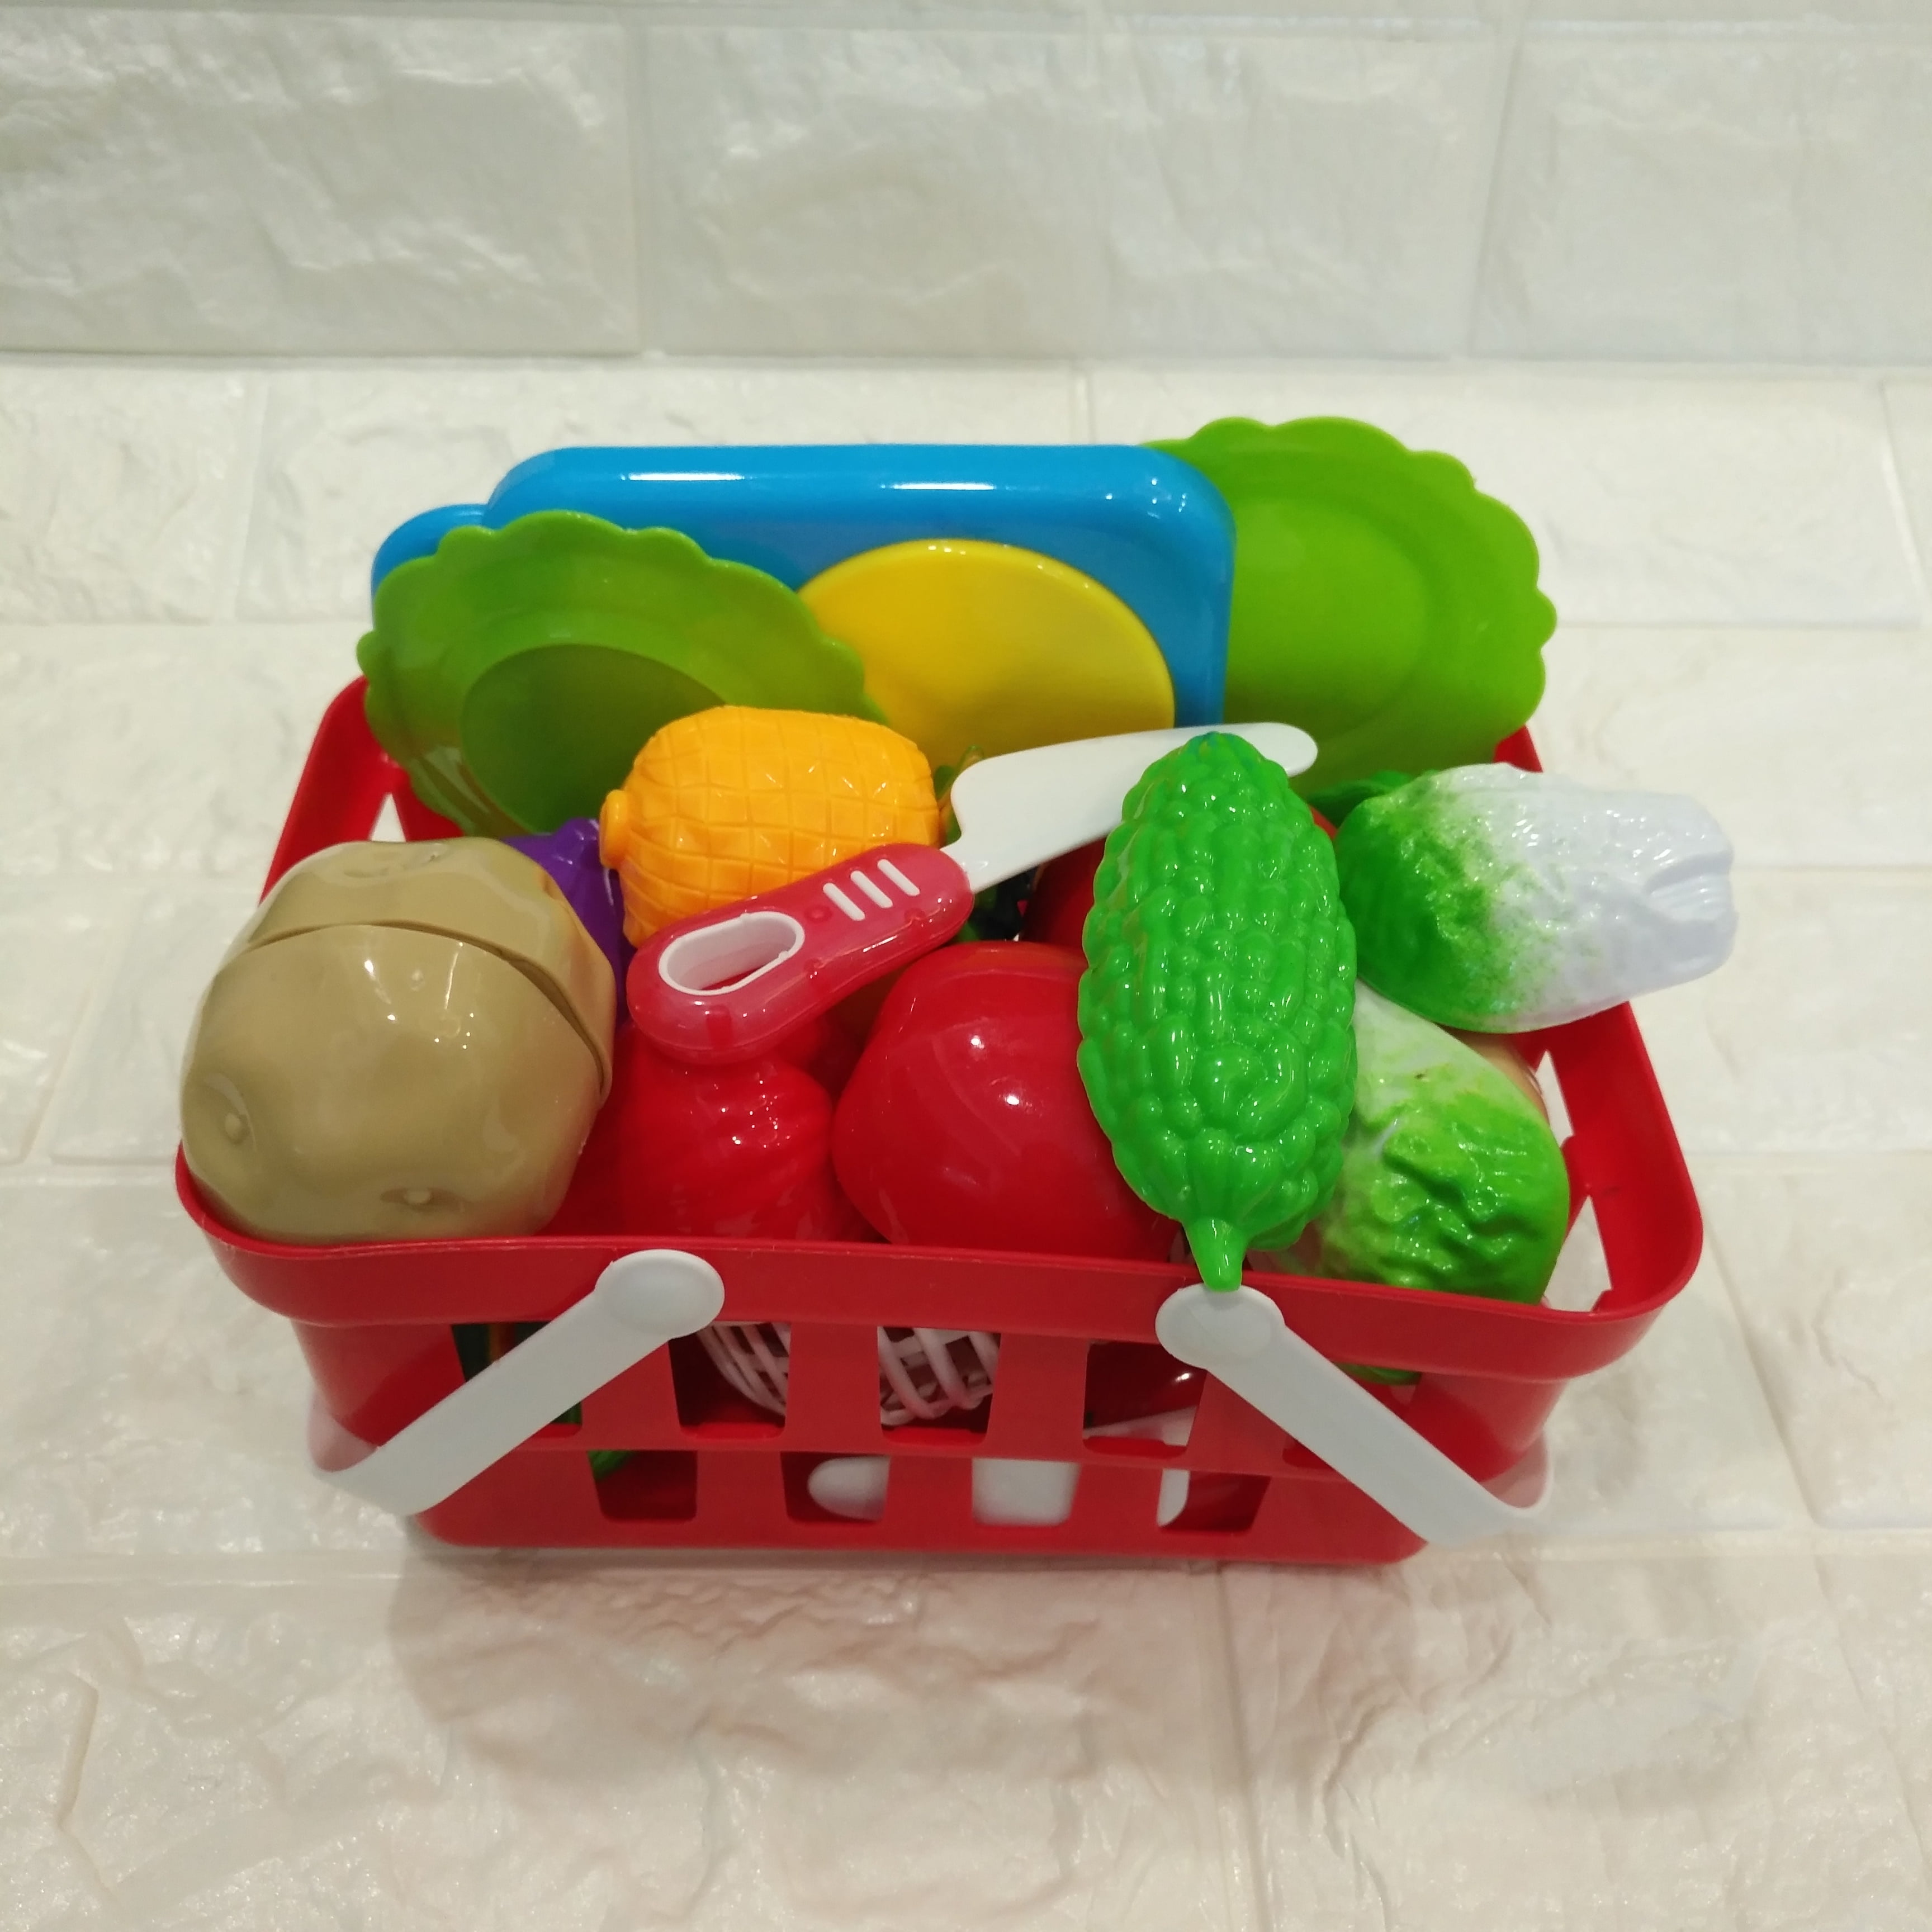 Kimicare Kitchen Toys Fun Cutting Fruits Vegetables Pretend Food Playset for Age 